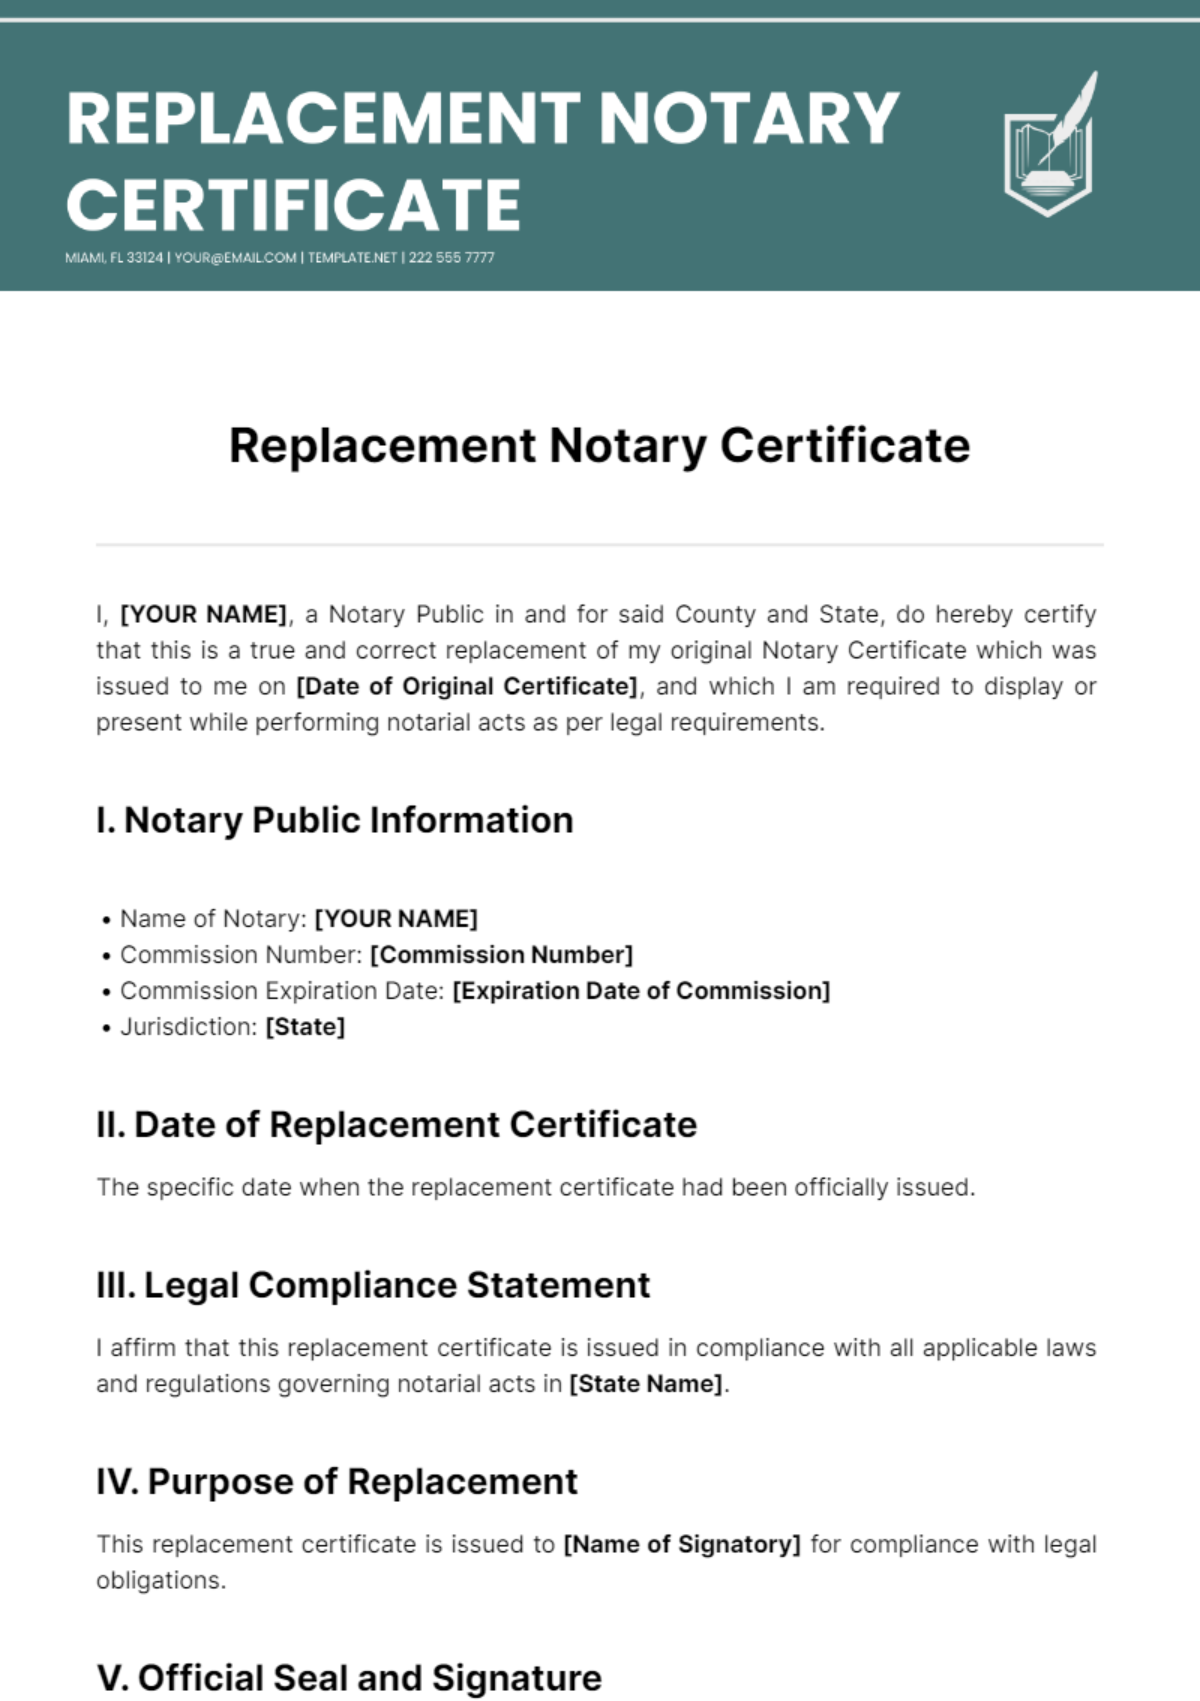 Replacement Notary Certificate Template